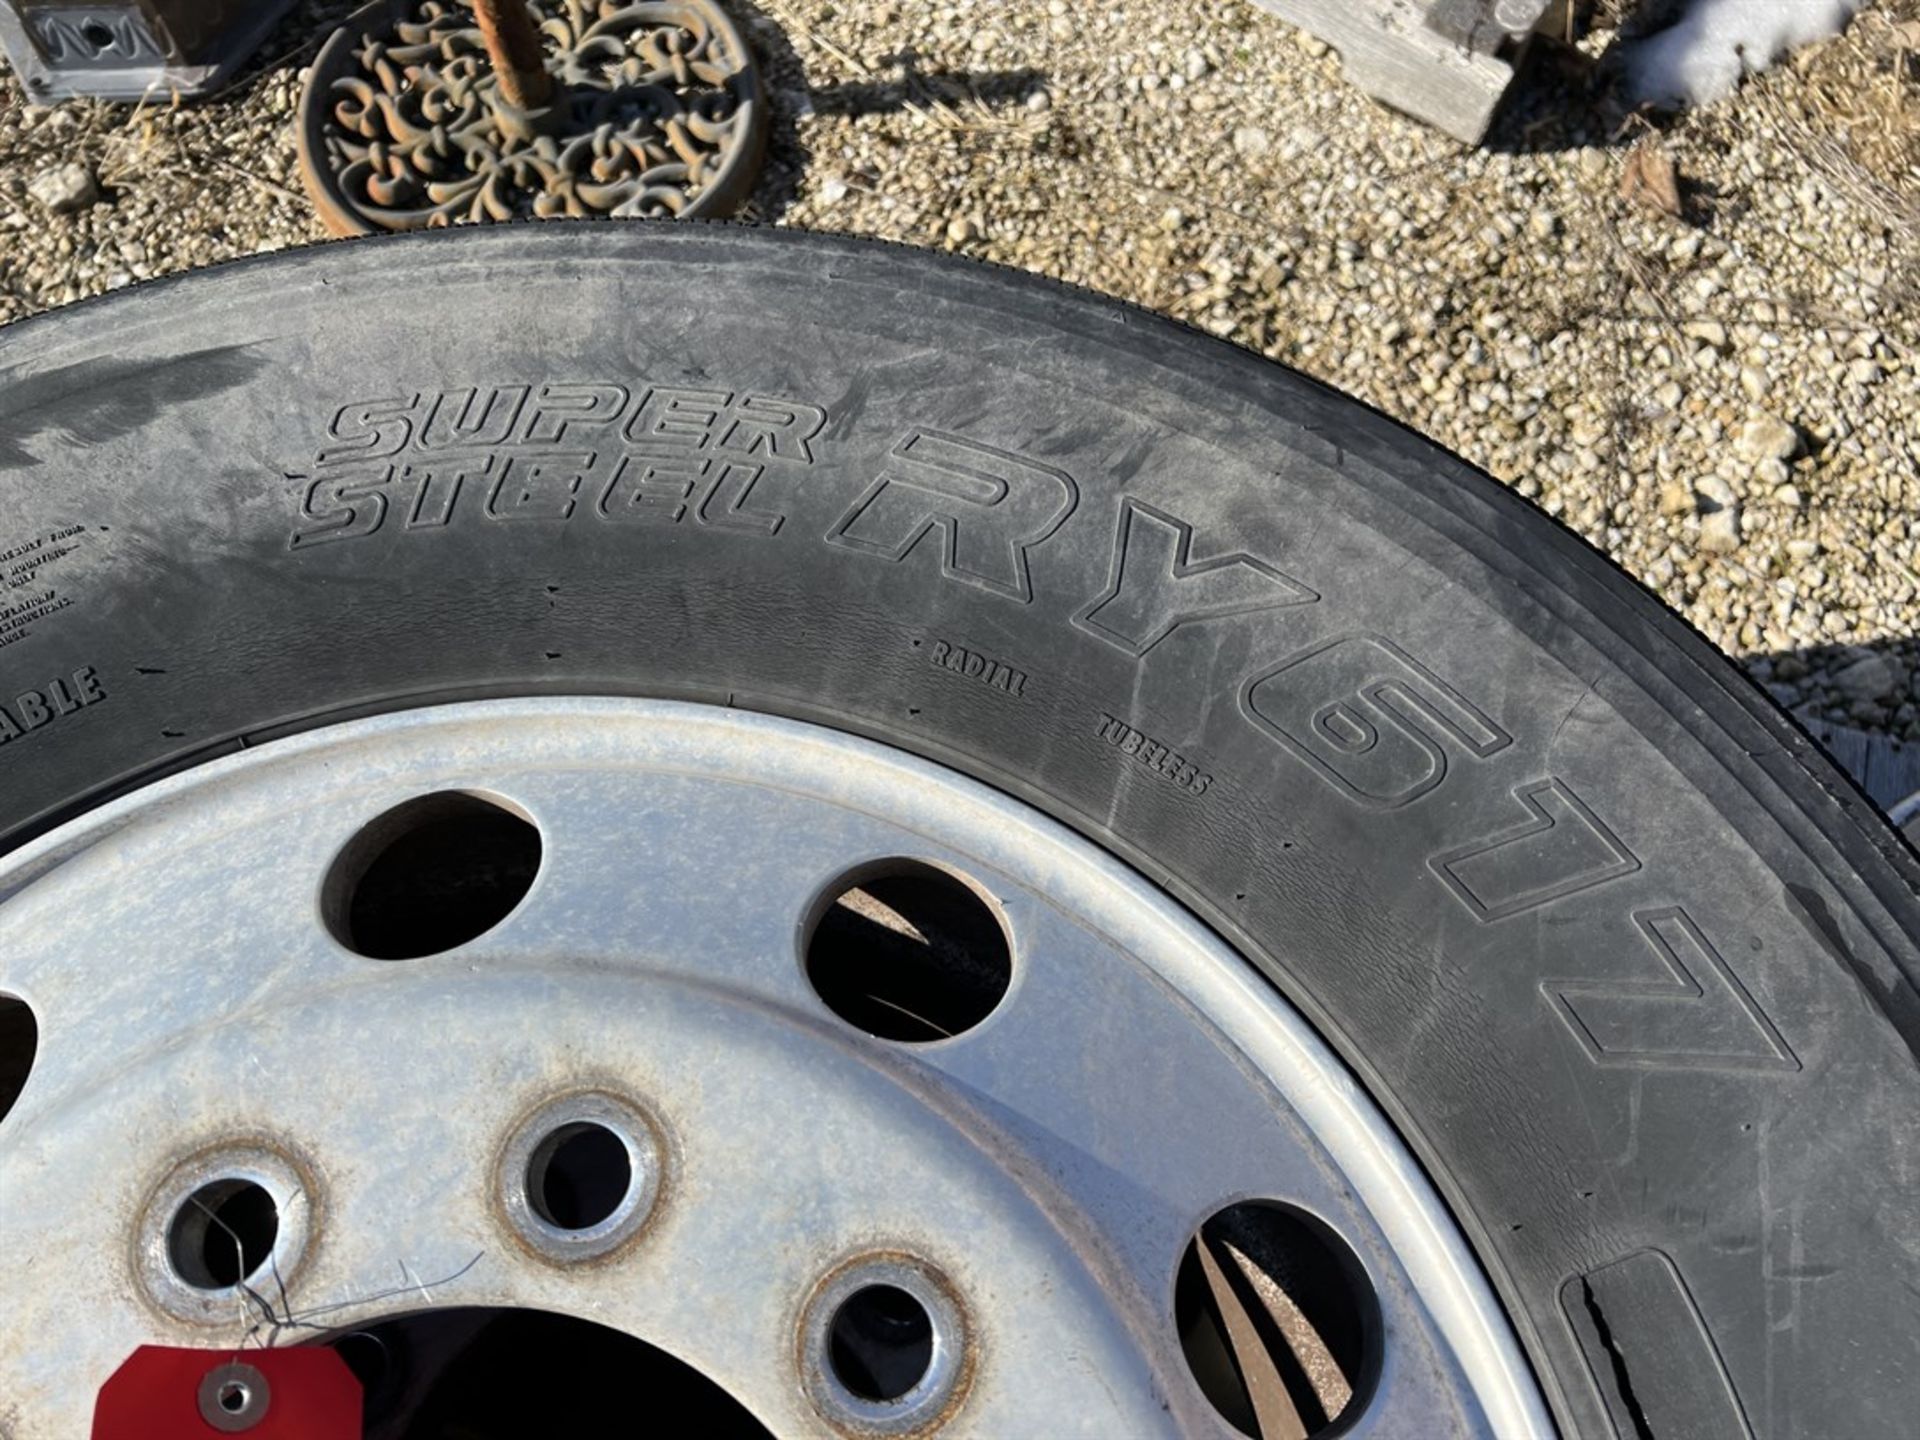 Lot of (2) 11R22.5 Truck Tire w/ Rim - Image 5 of 6